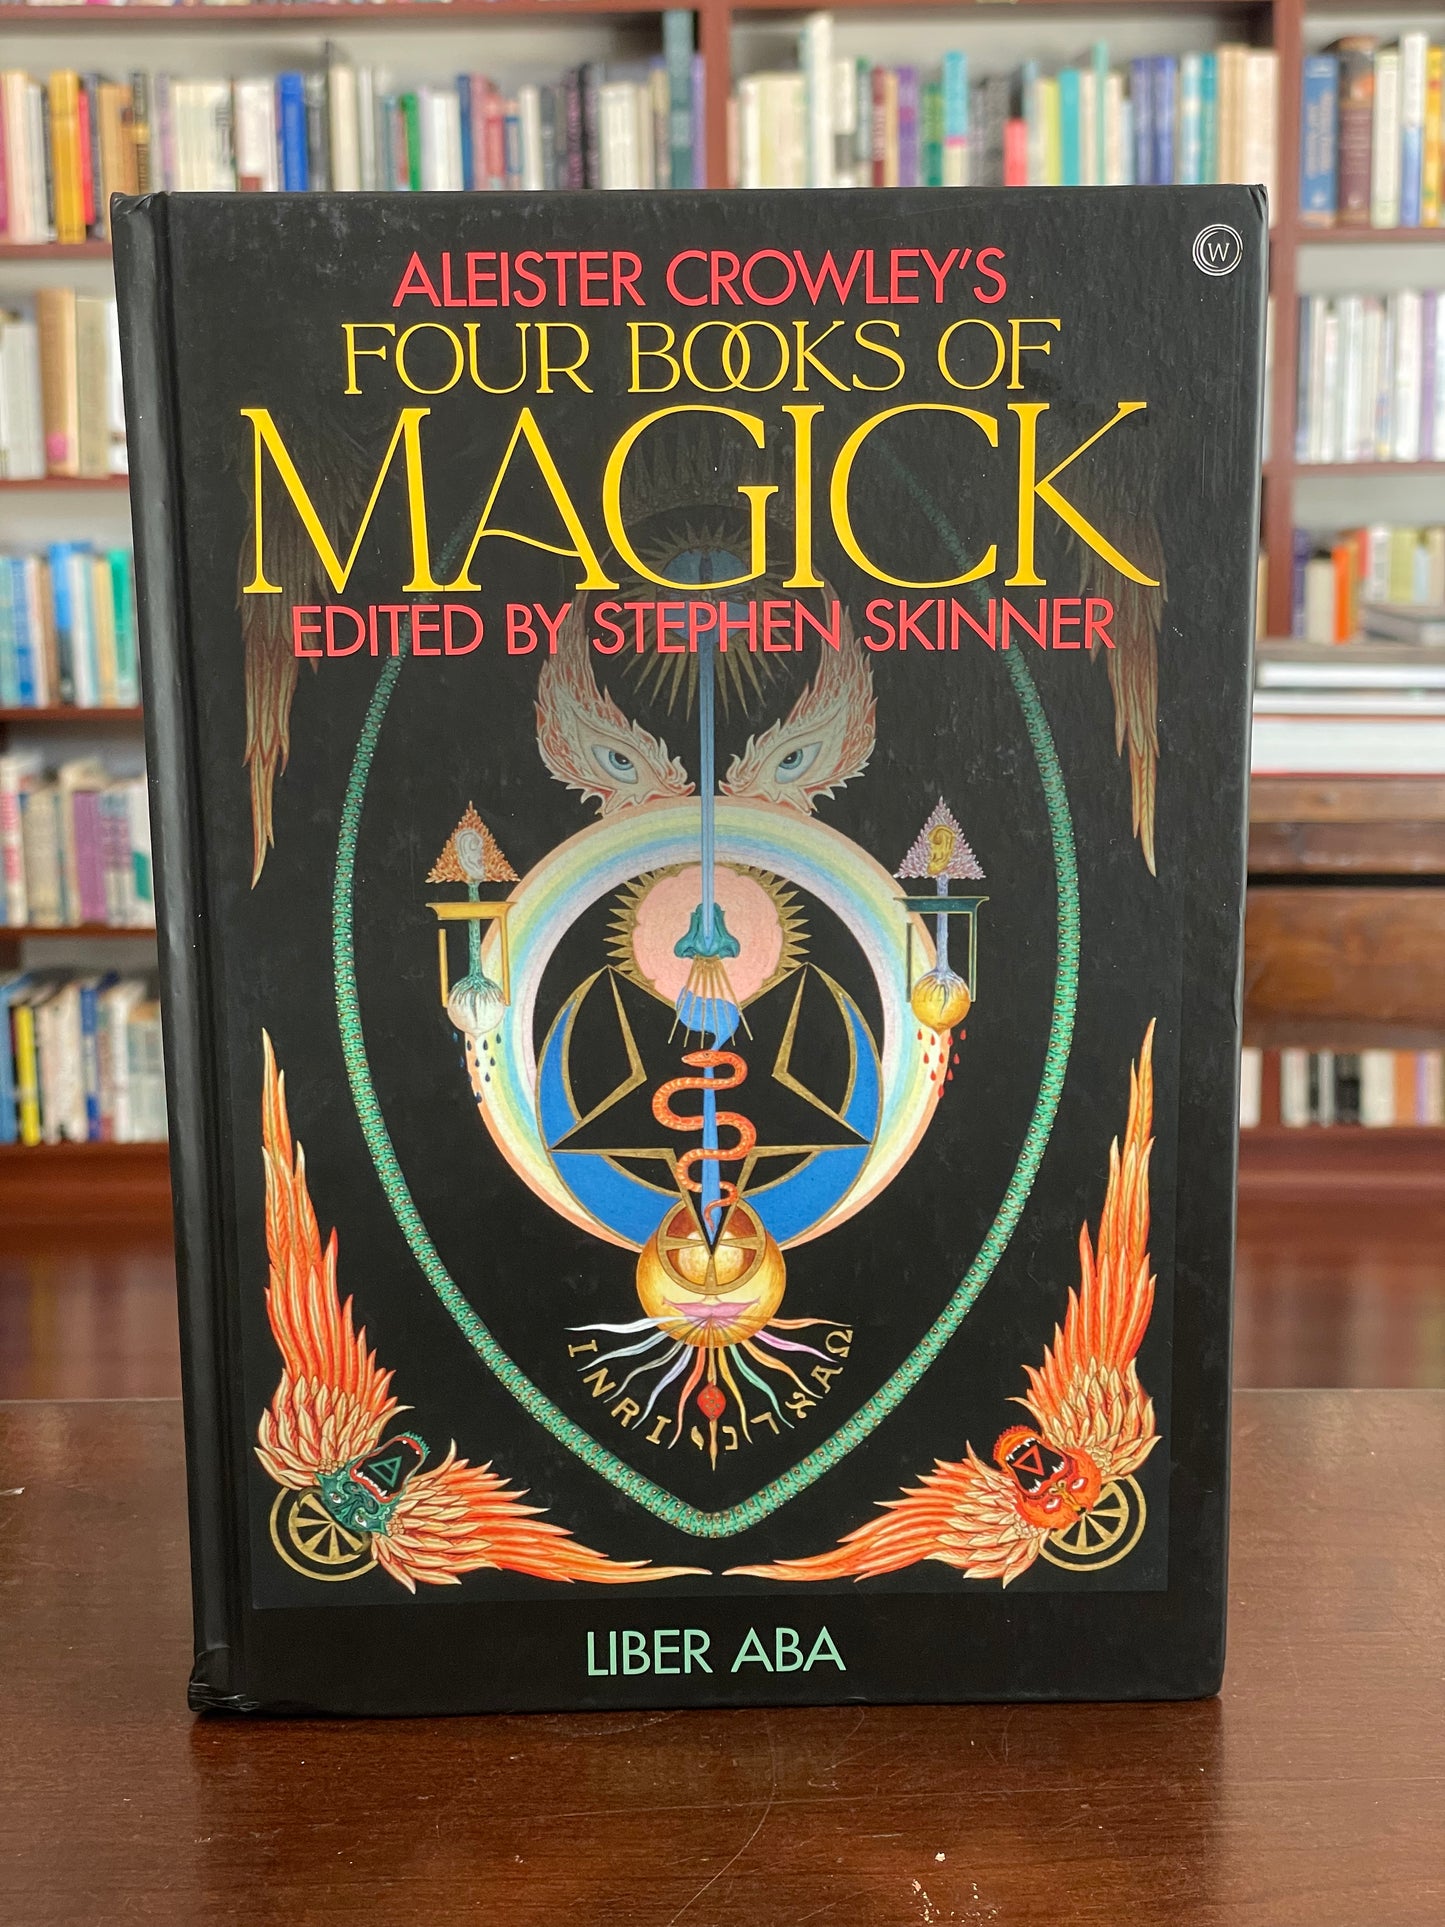 Four Books of Magick by Aleister Crowley (UK Edition)